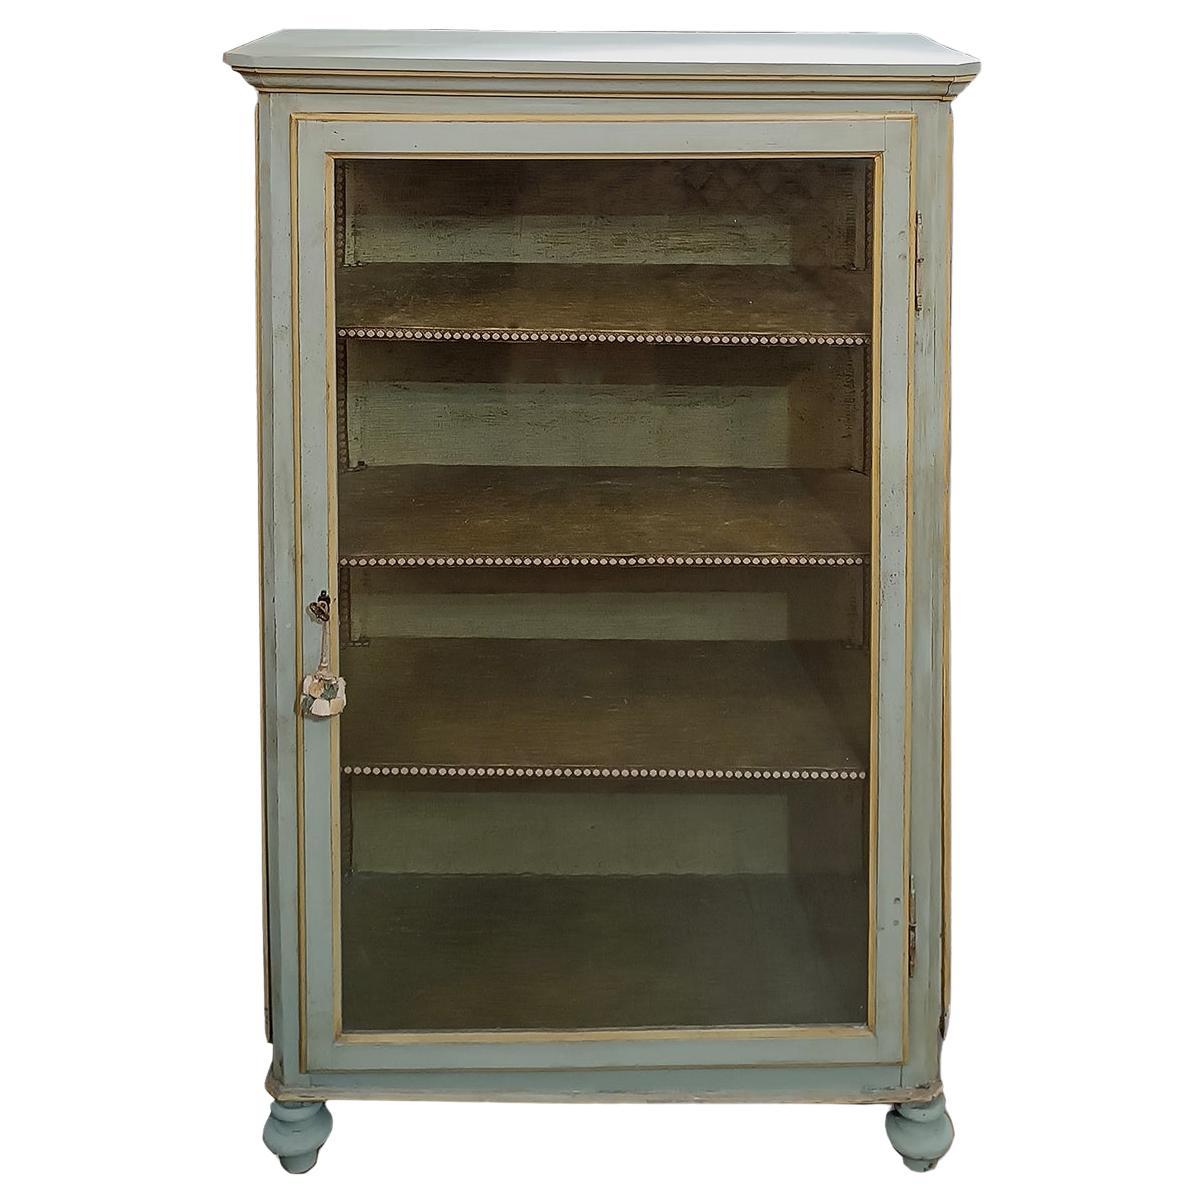  19th CENTURY DISPLAY CABINET IN PAINTED GREEN AND YELLOW POPLAR  For Sale